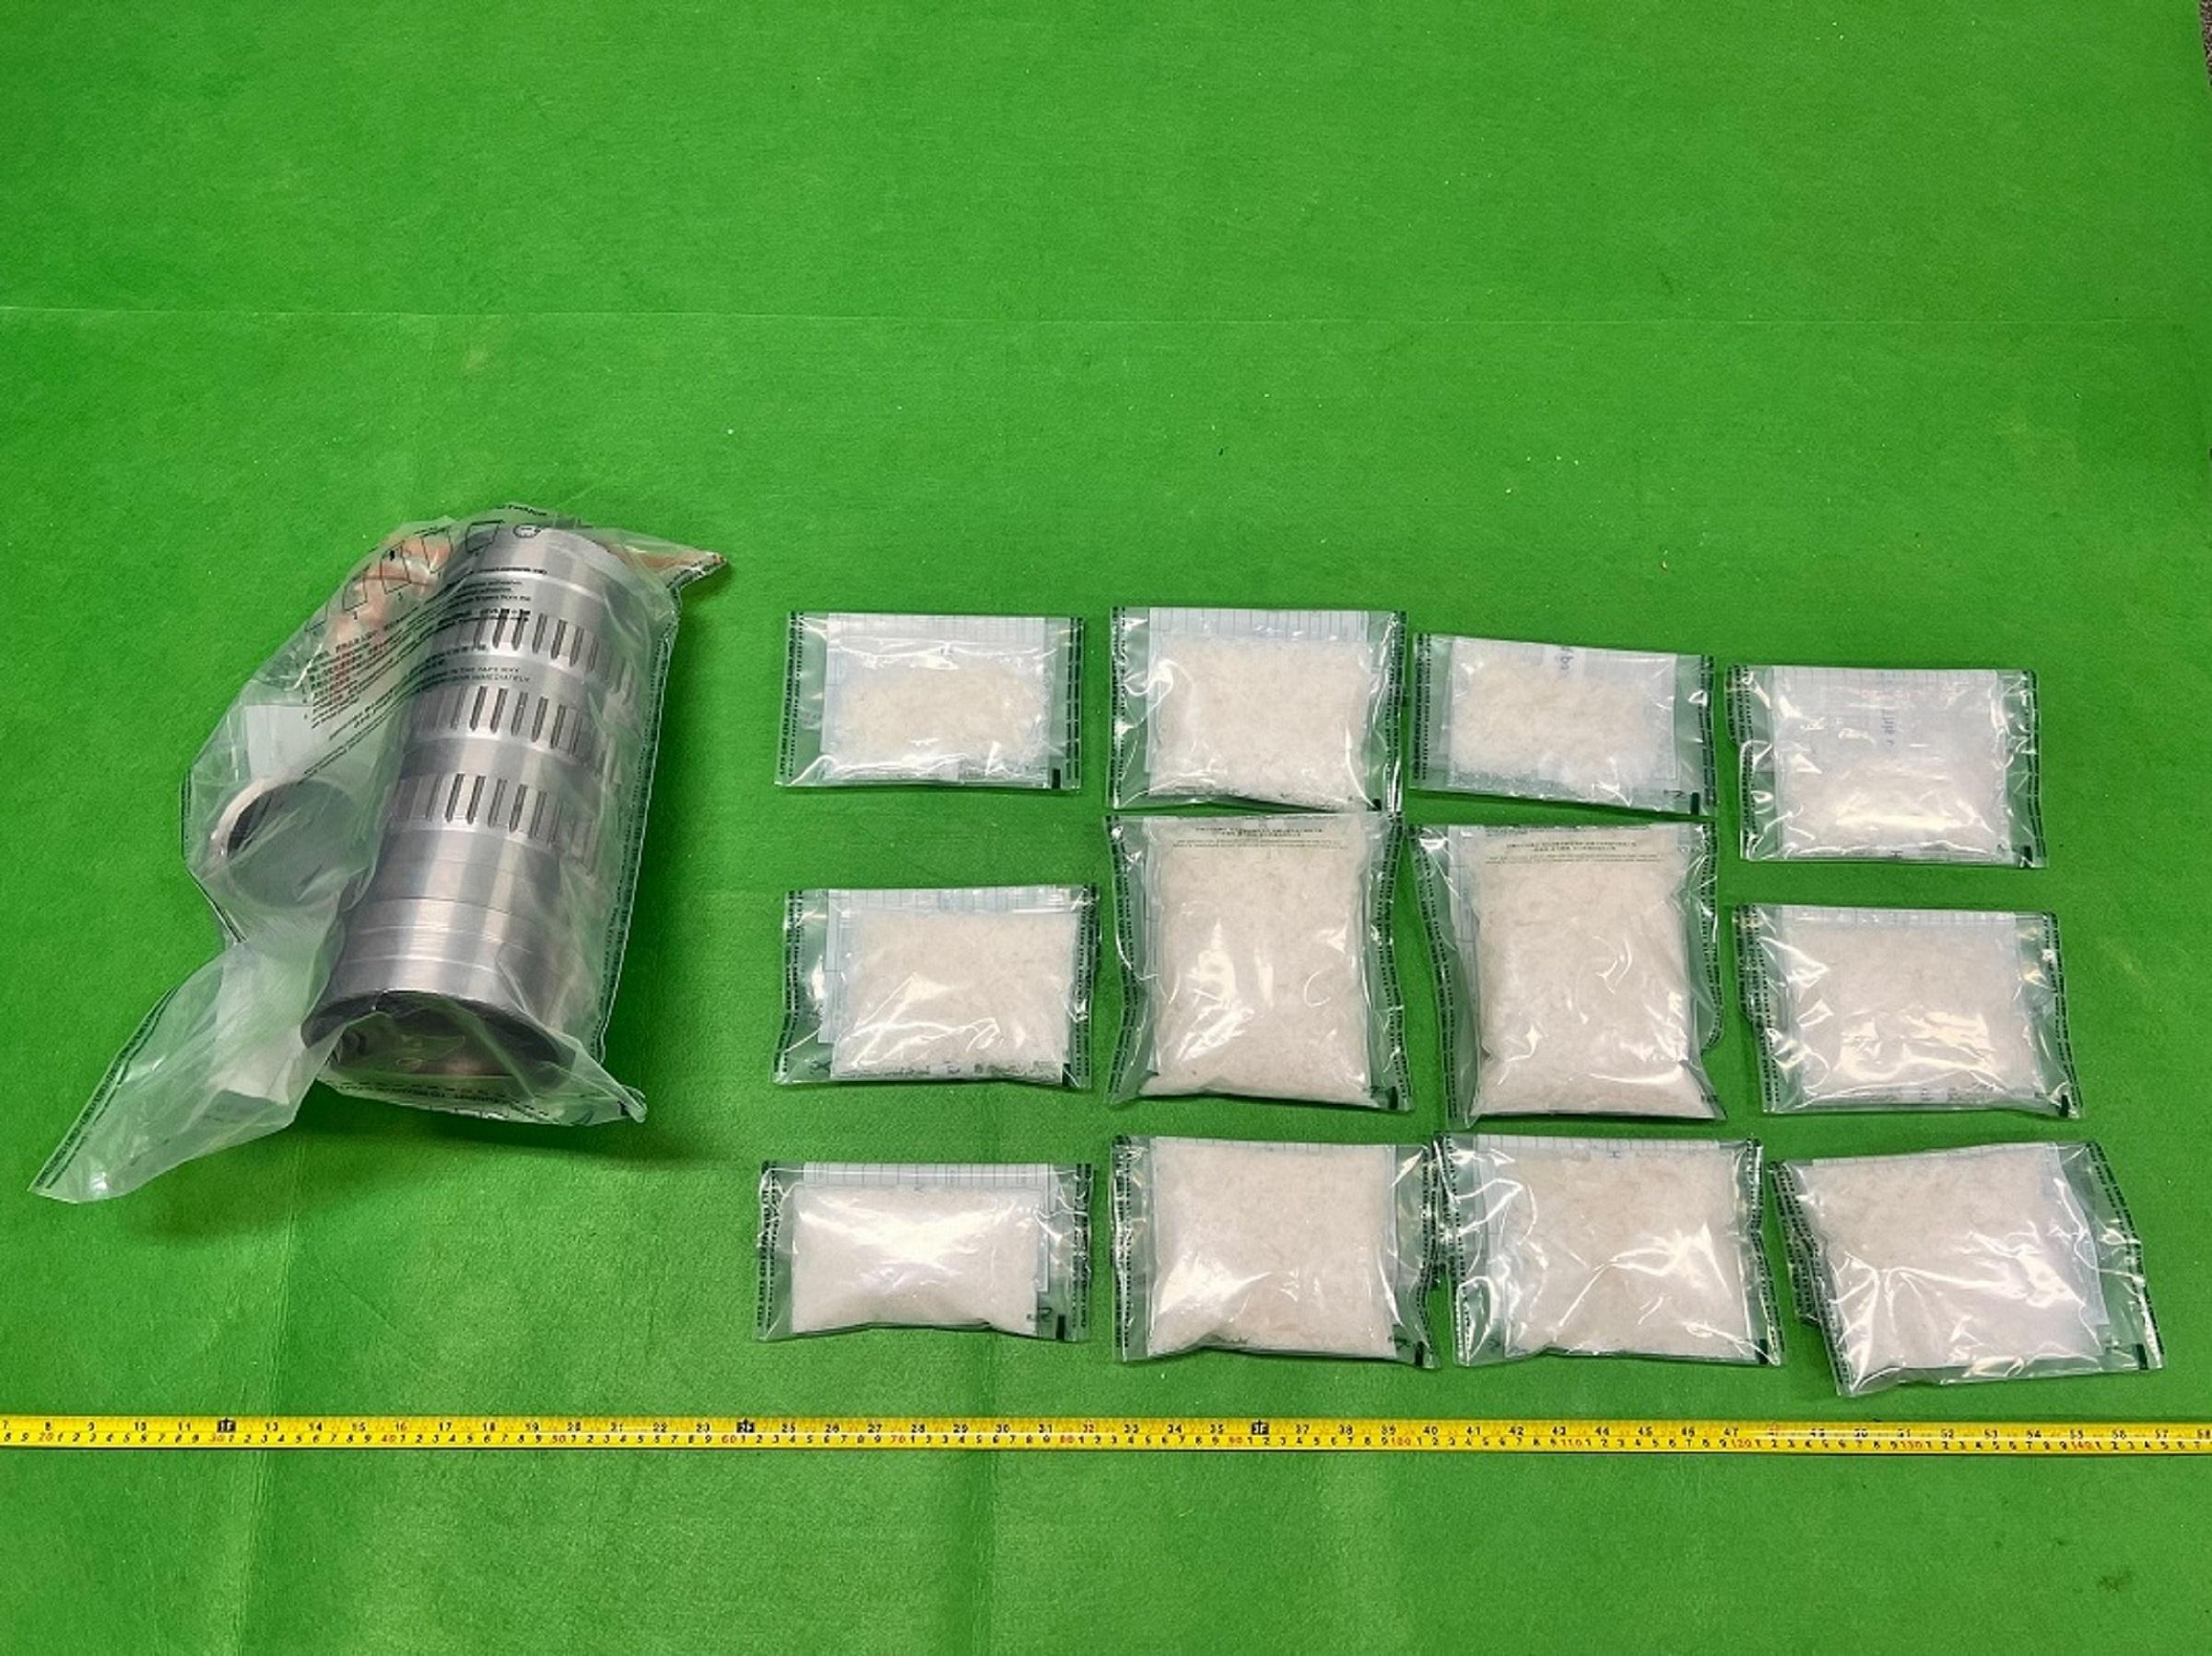 Hong Kong Customs on October 11 seized about 2.2 kilograms of suspected methamphetamine with an estimated market value of about $1.34 million at Hong Kong International Airport. Photo shows the suspected methamphetamine seized and the metal gearbox used to conceal the drugs.